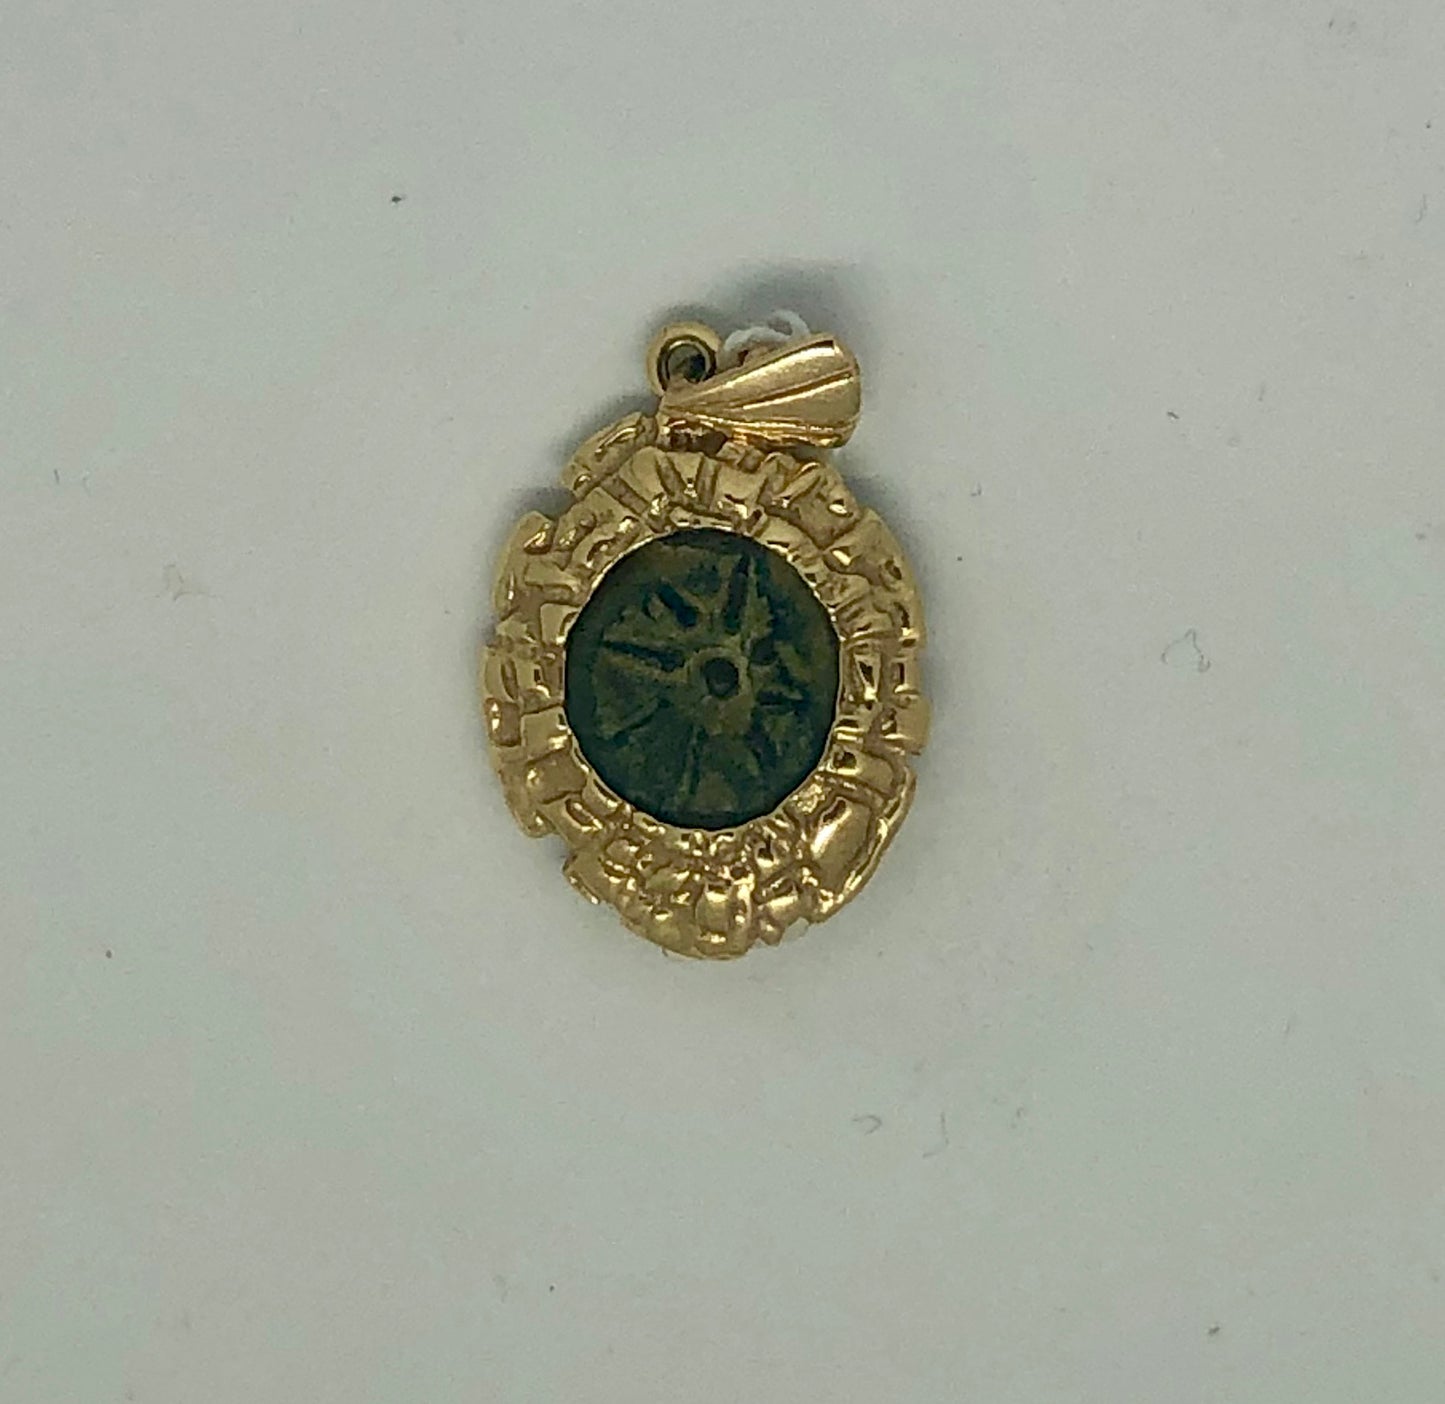 A Pendant Coin of the Widow's Mite, 14k.